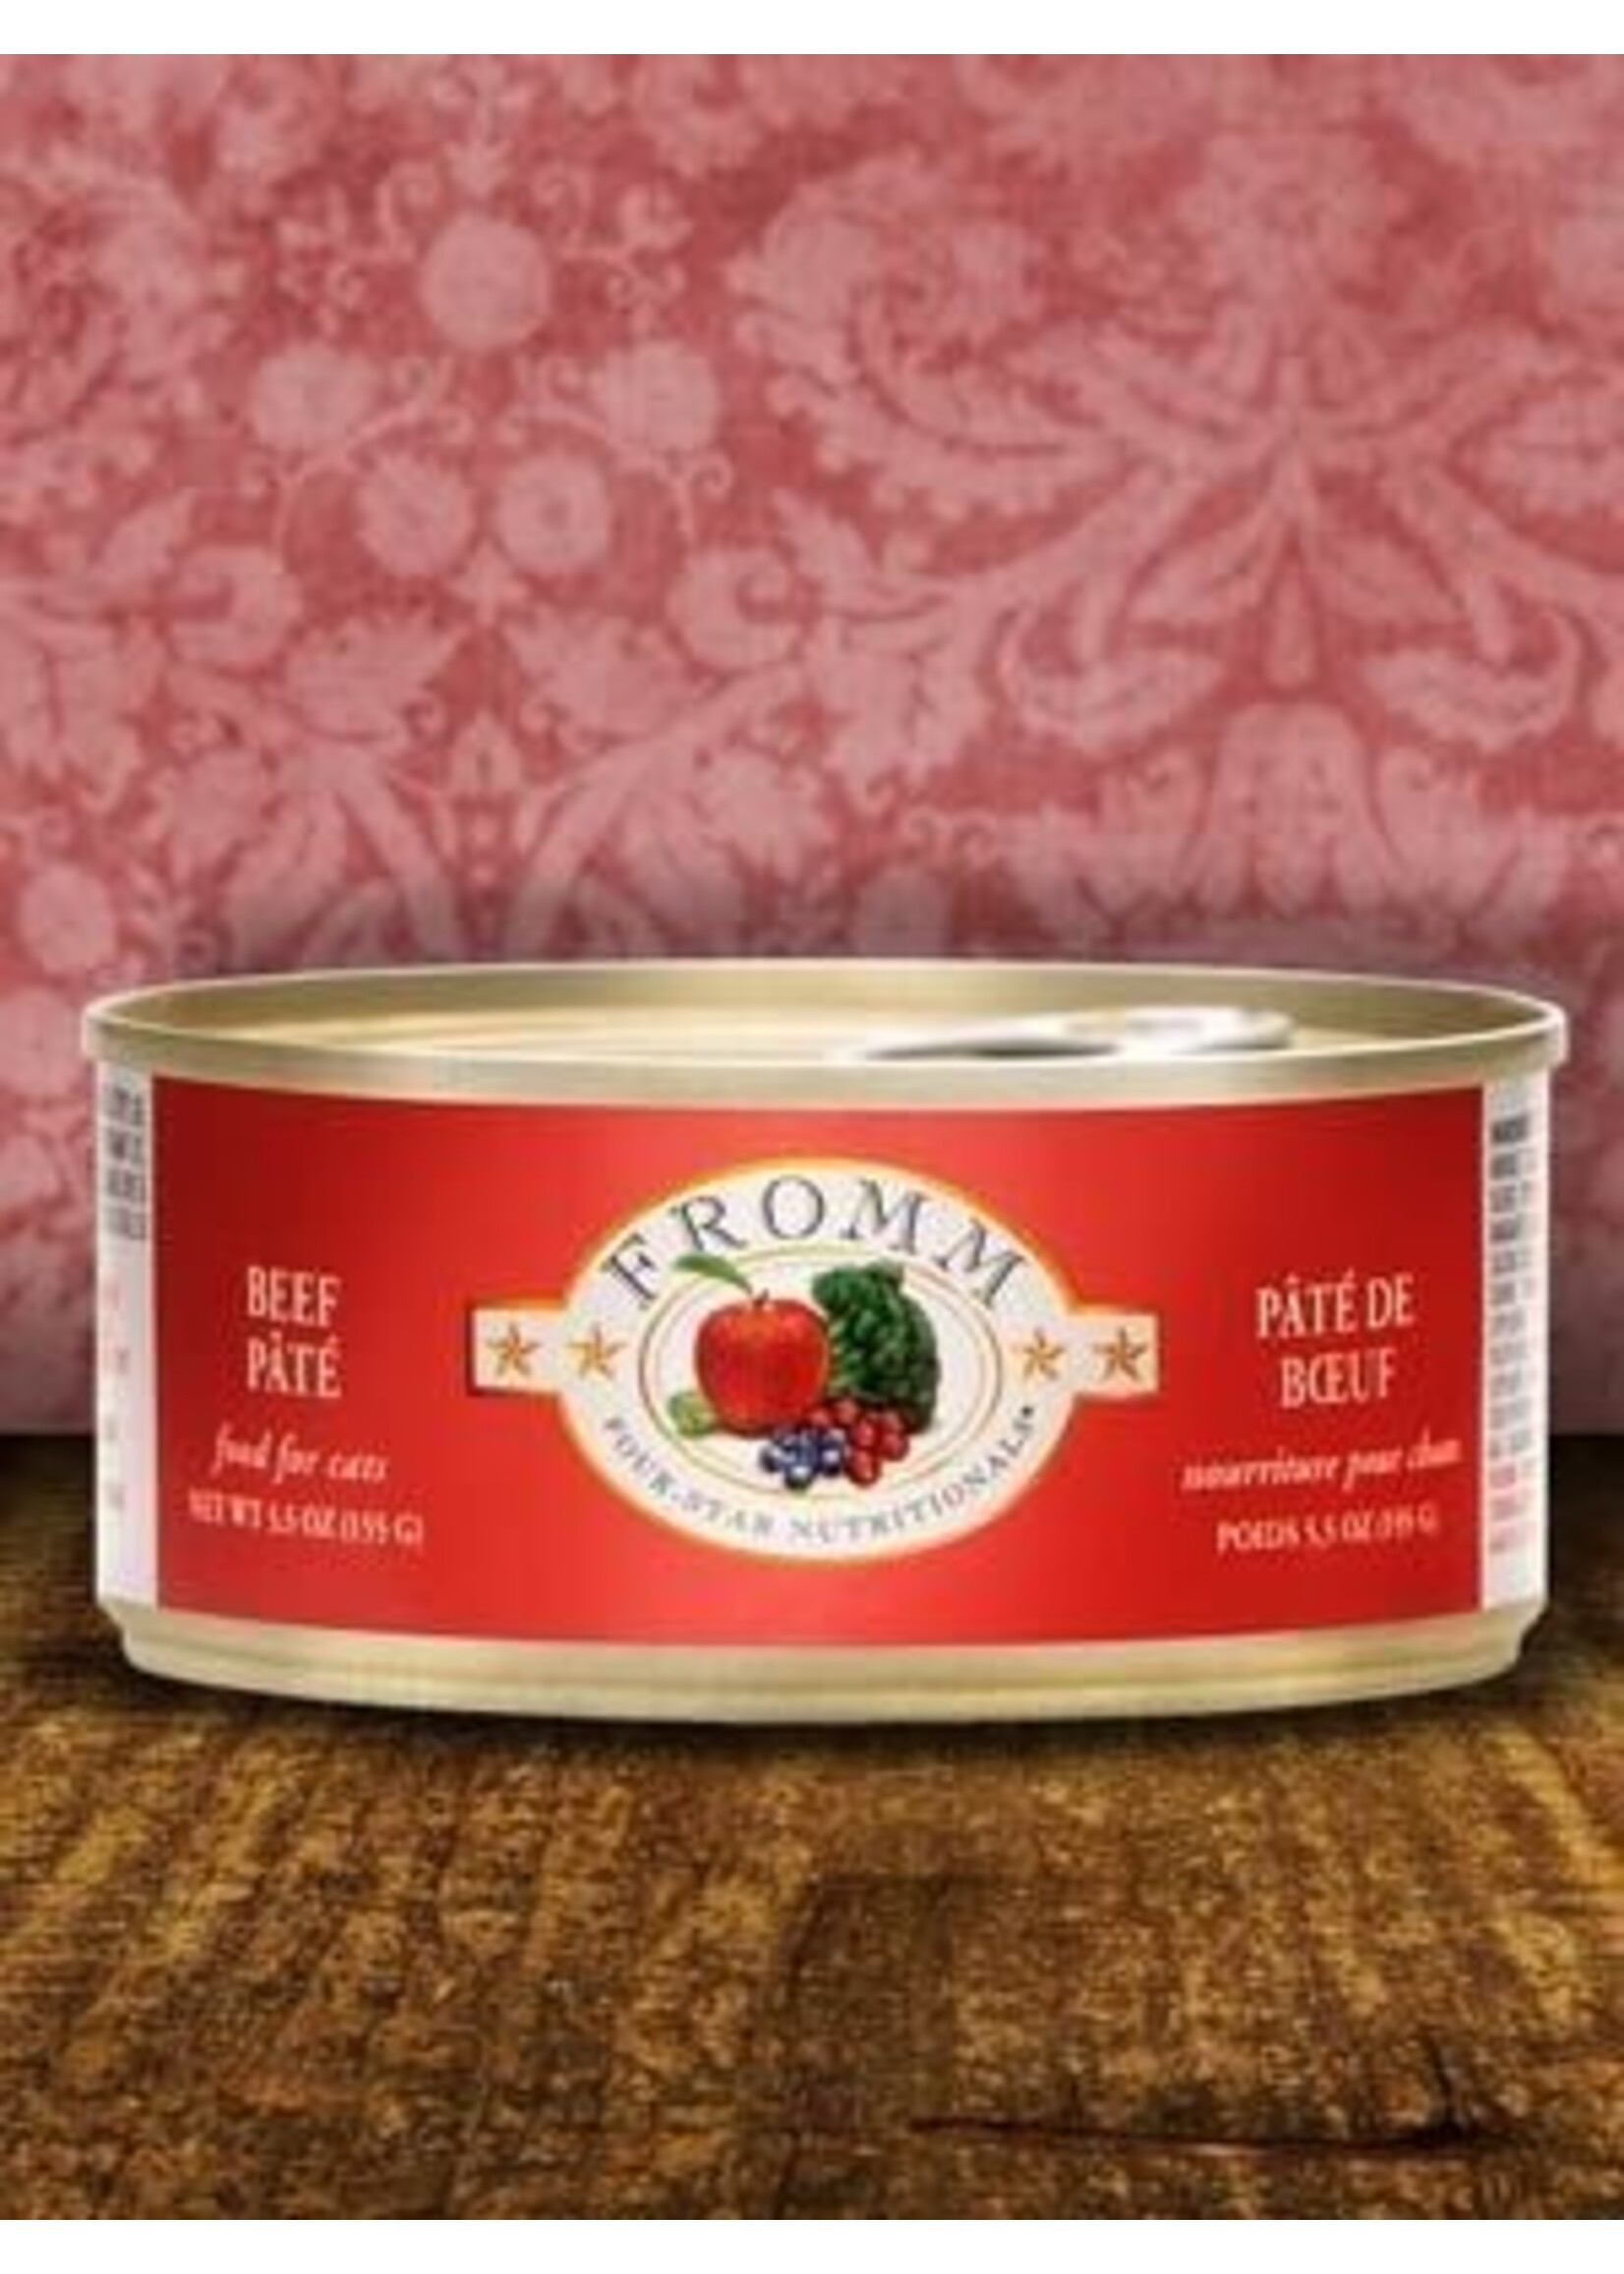 Fromm Fromm Cat Beef Pate Wet Food 5.5oz Can